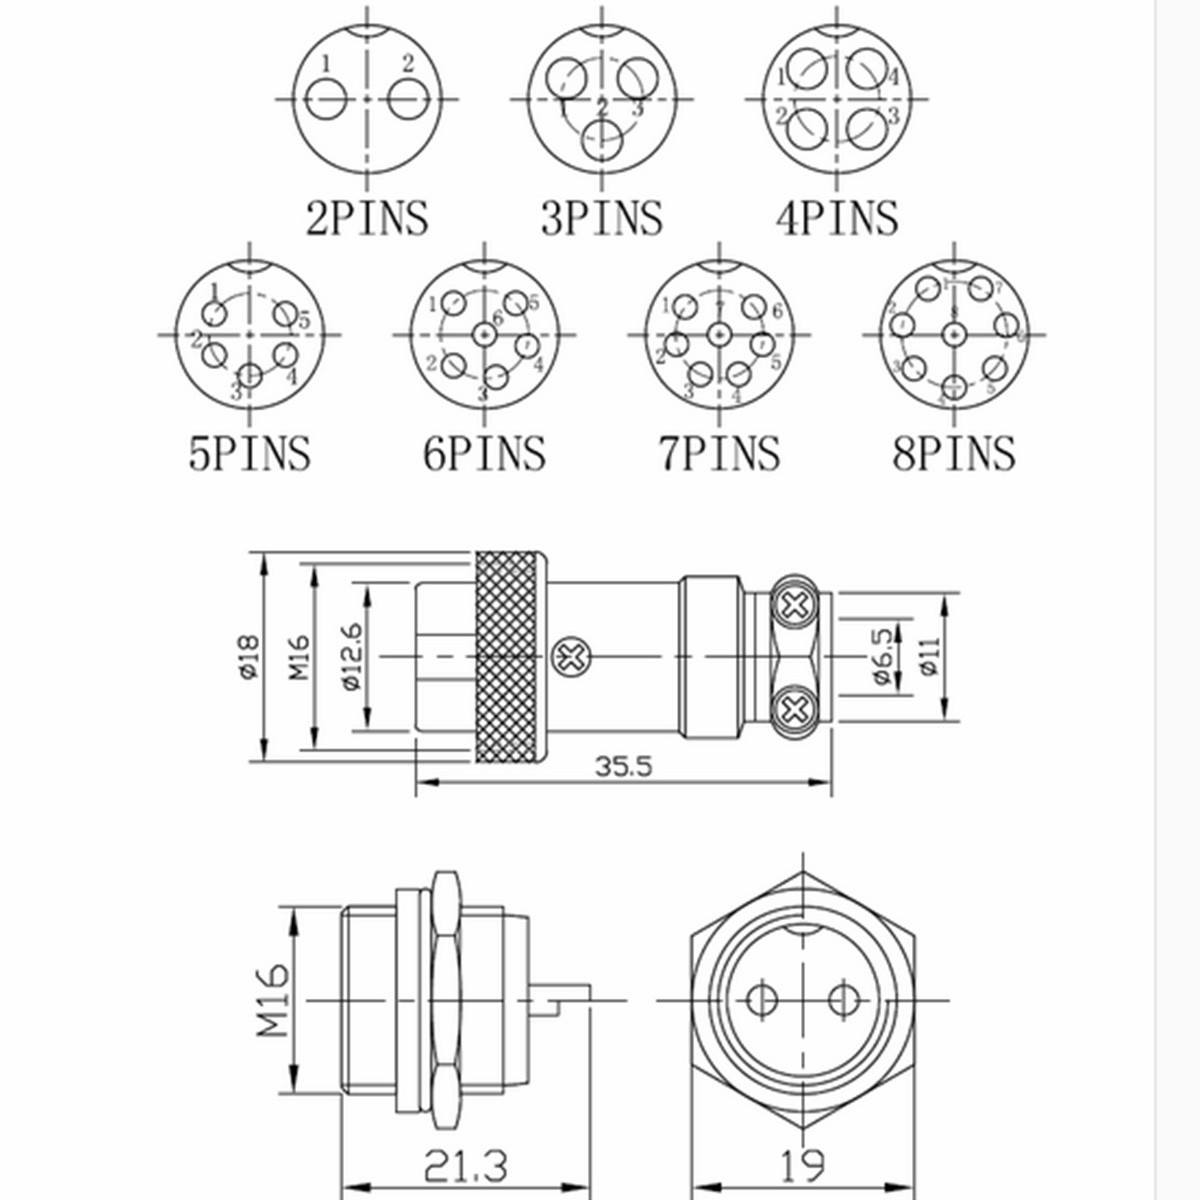 M16-2345678-Pin-Screw-Type-Electrical-Aviation-Plug-Socket-Connector-Aviation-Connector-Plug-1333374-2